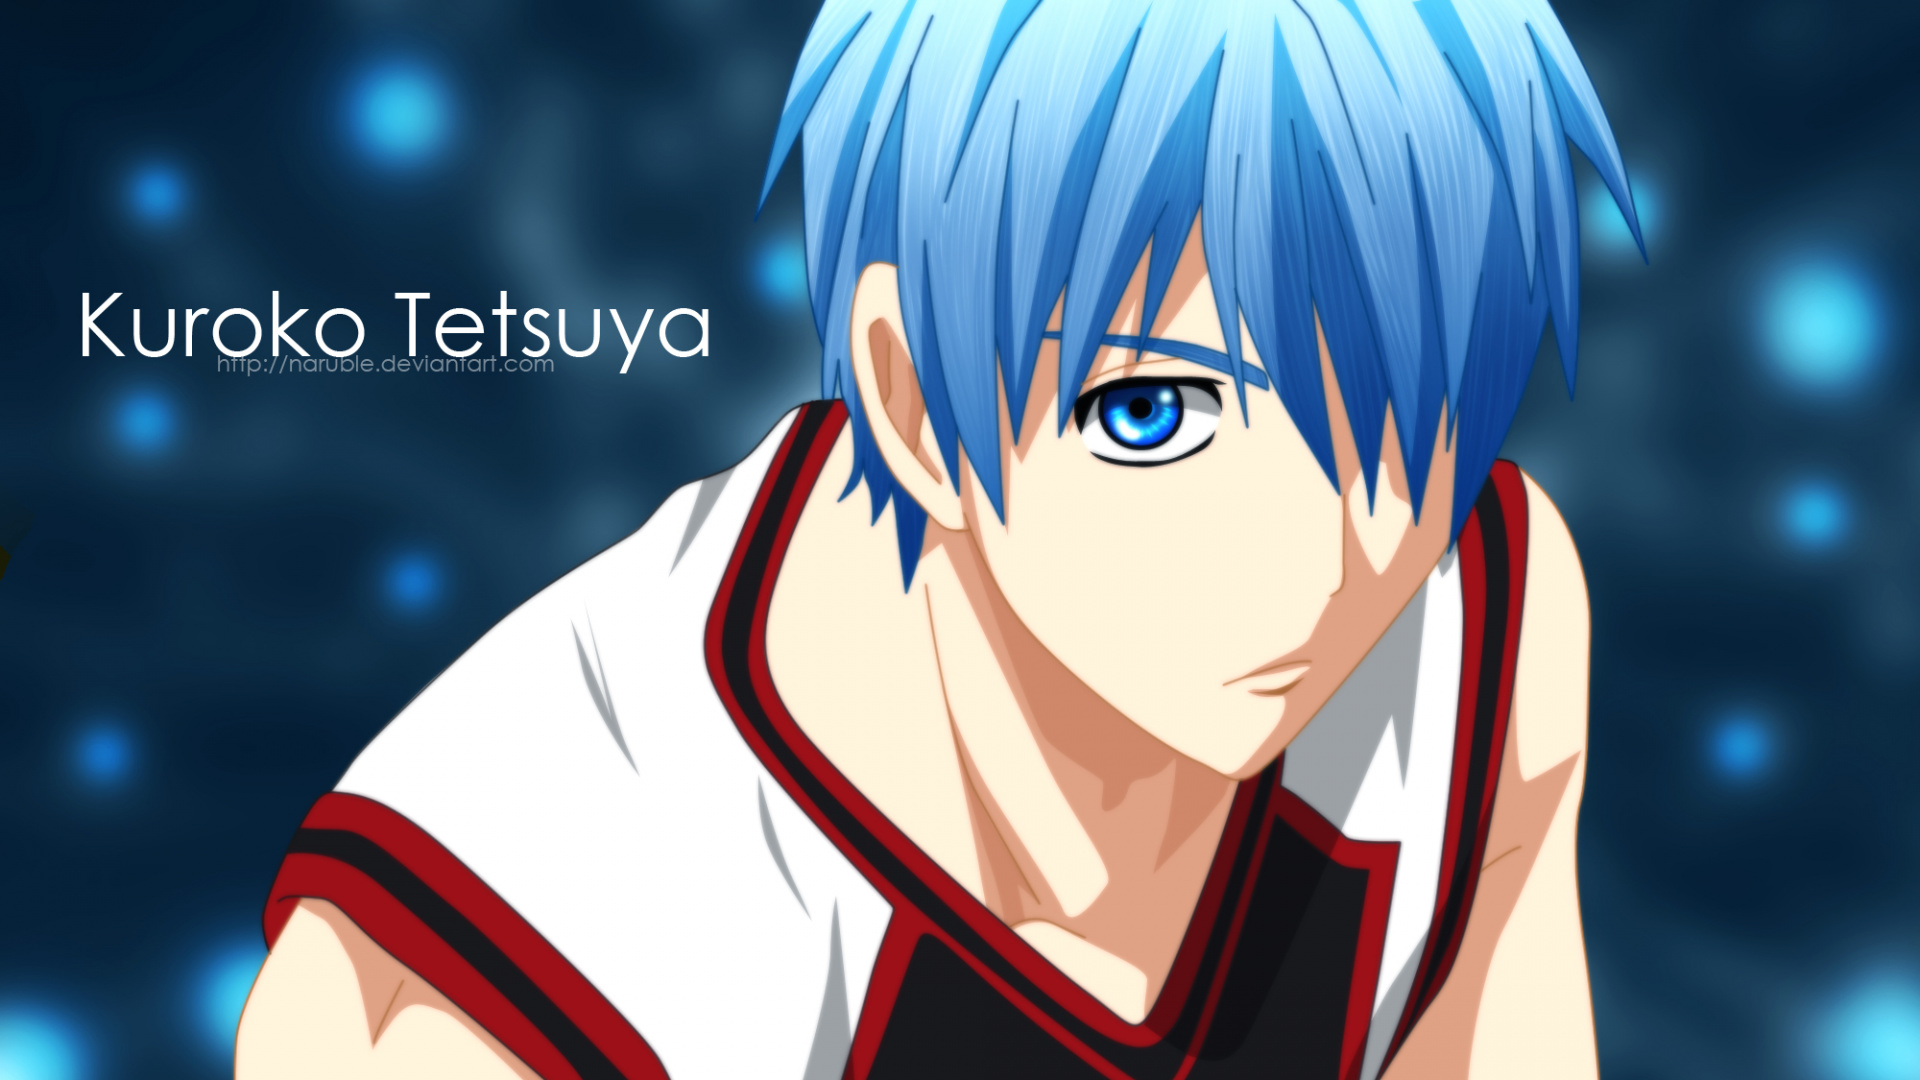 Blue Haired Male Anime Character. Wallpaper in 1920x1080 Resolution